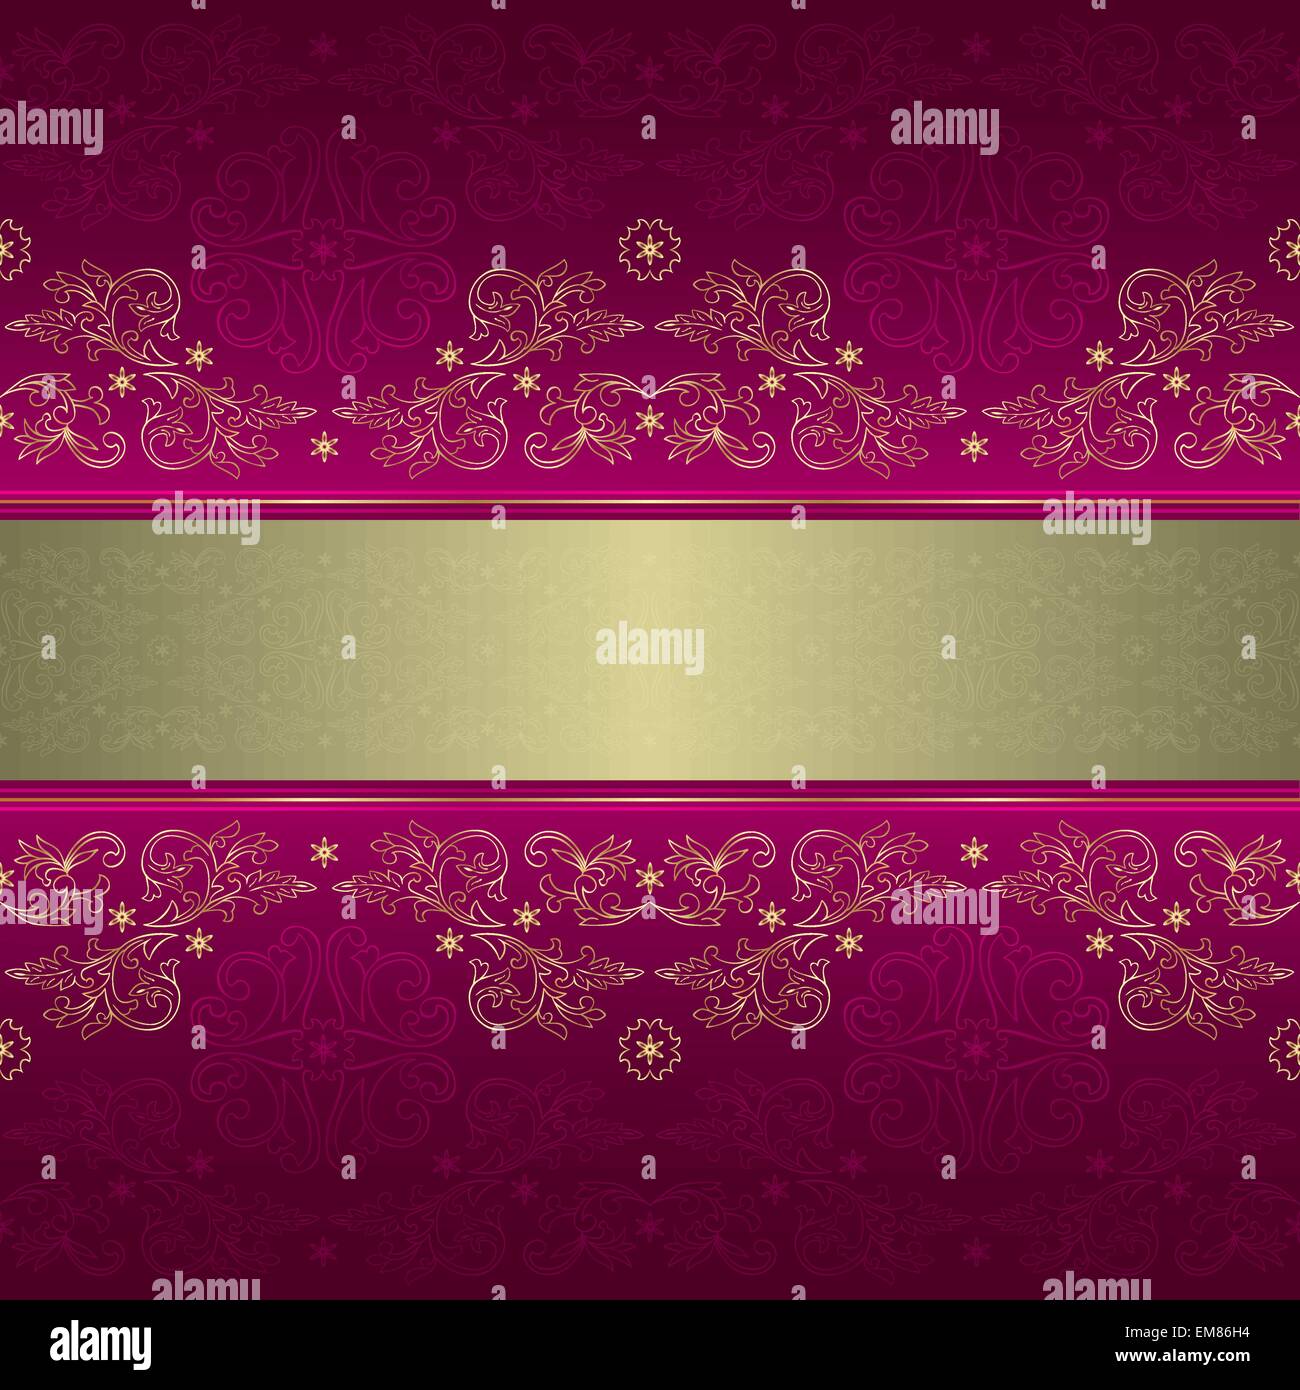 Template with ornate floral seamless pattern on a pink backgroun Stock Vector